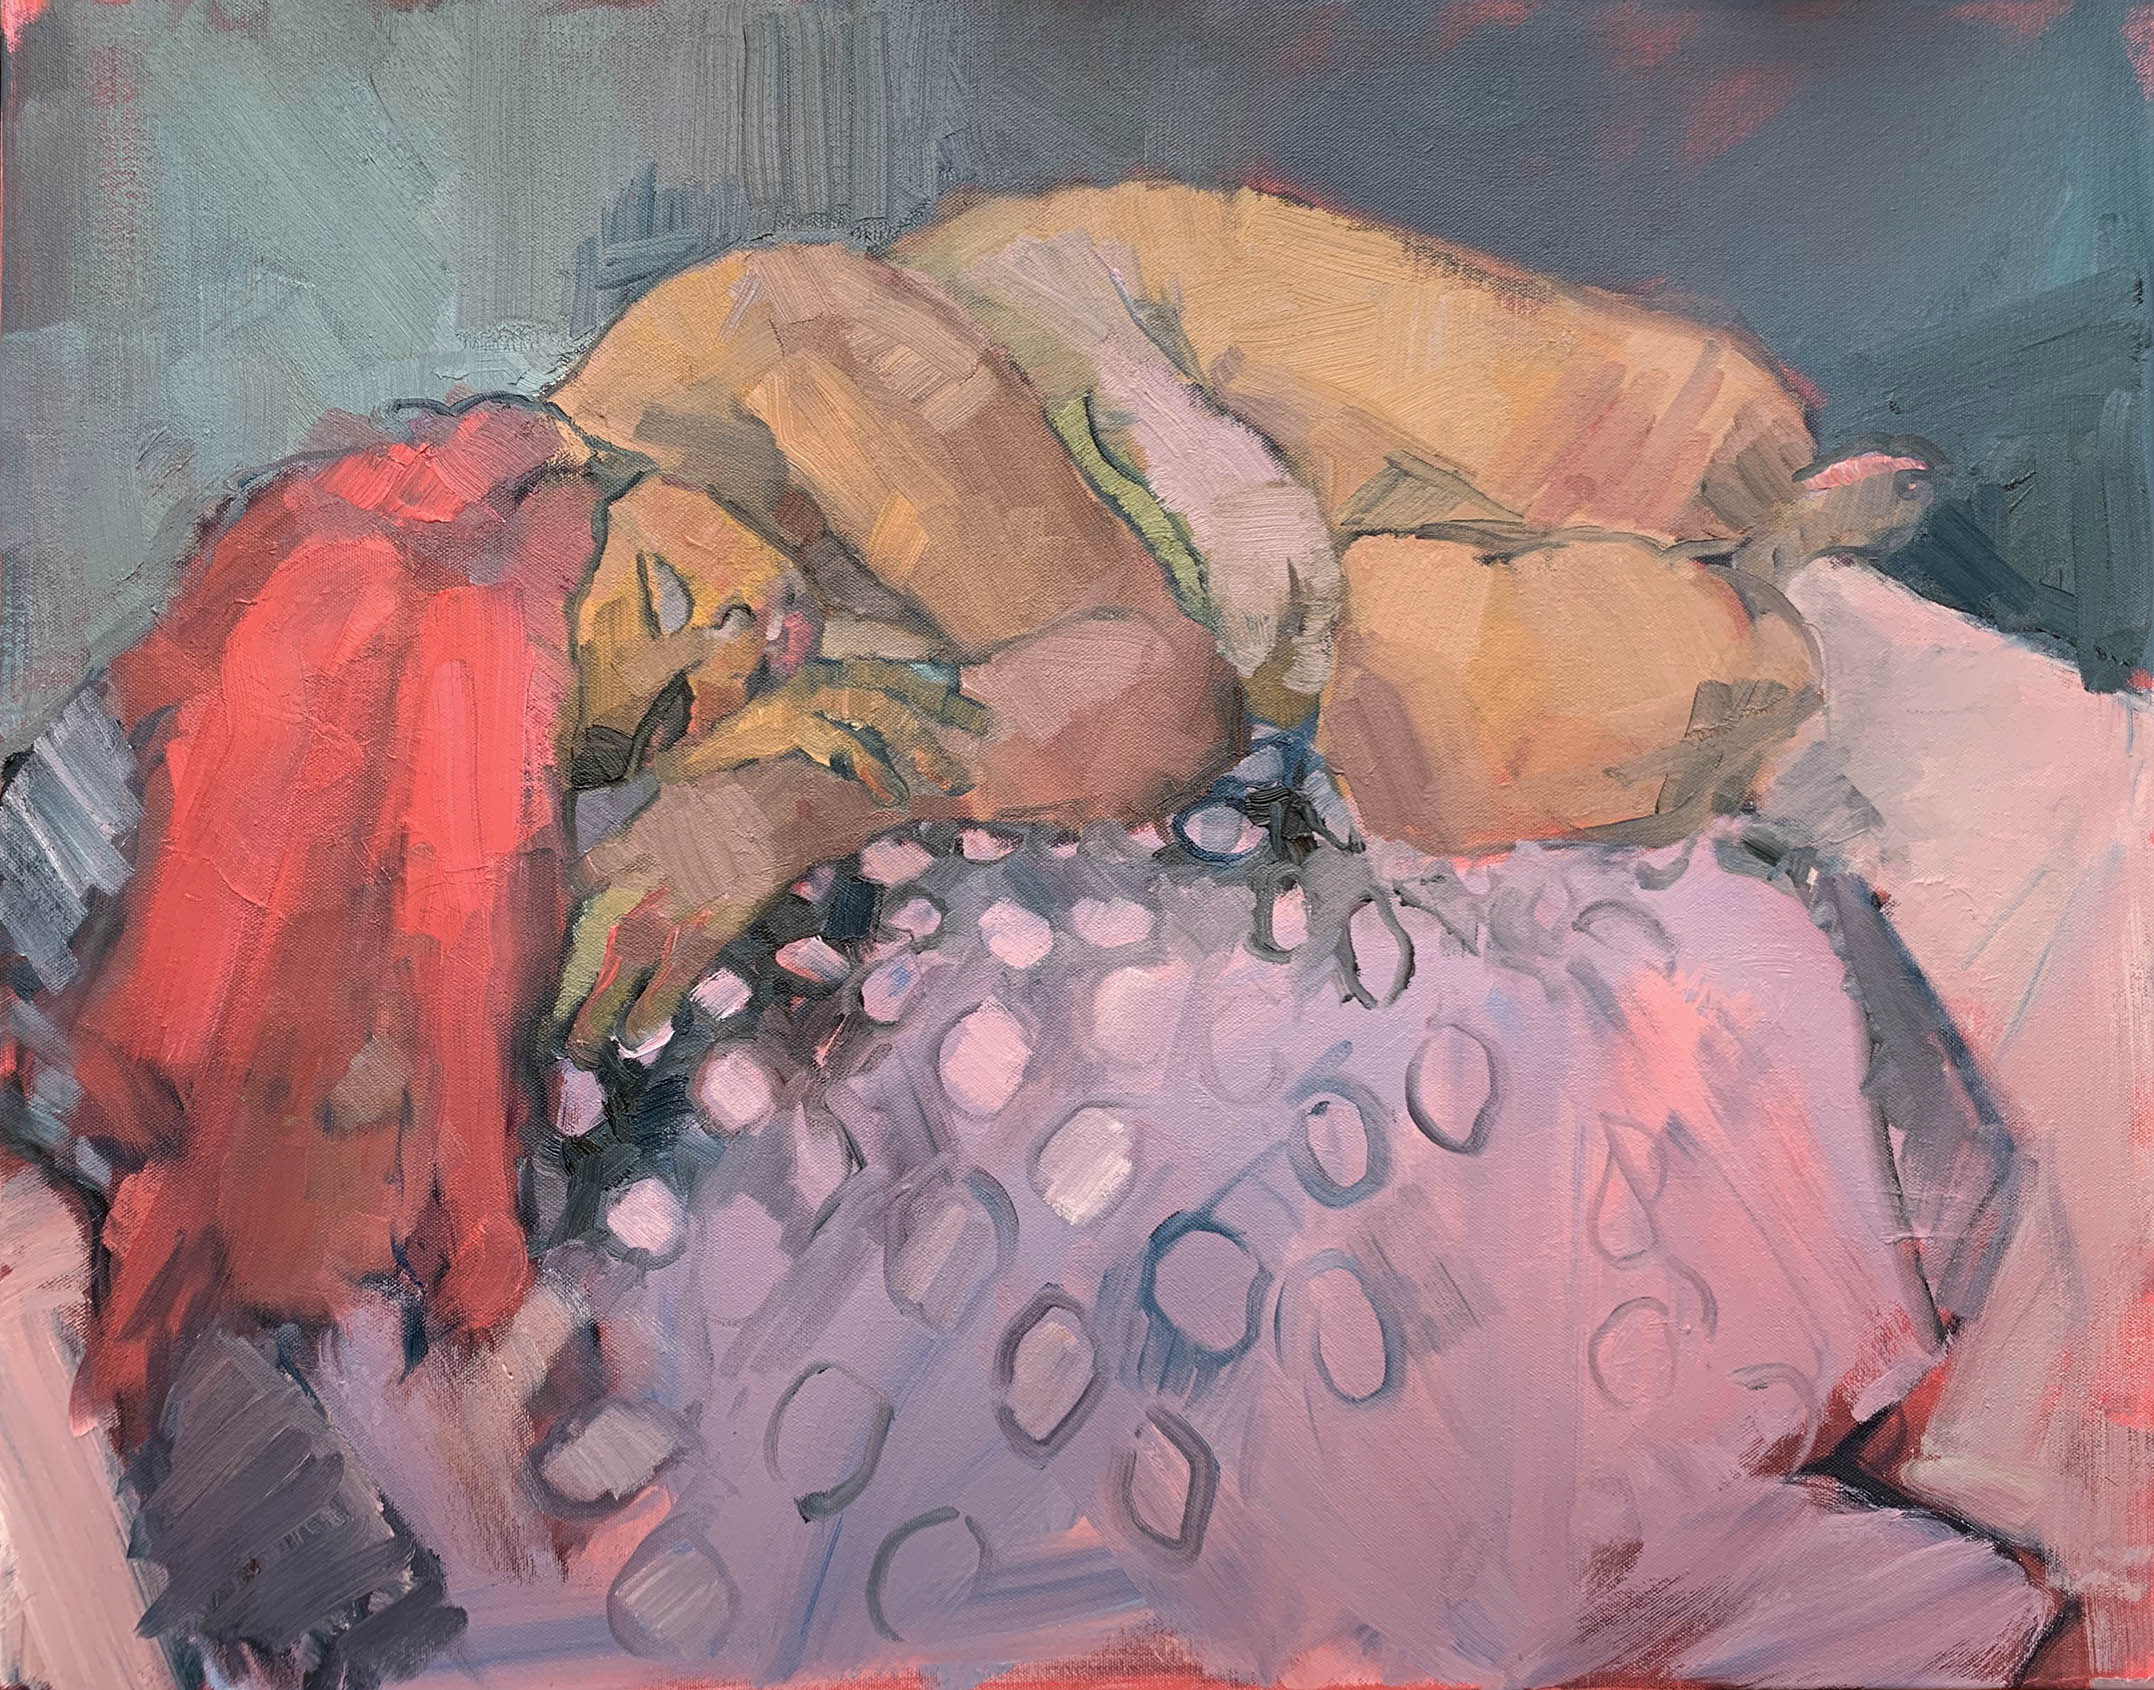 'Afton Dreaming On A Spotty Throw', Charlotte Houlihan, Oil on canvas, 60 x 76 cm